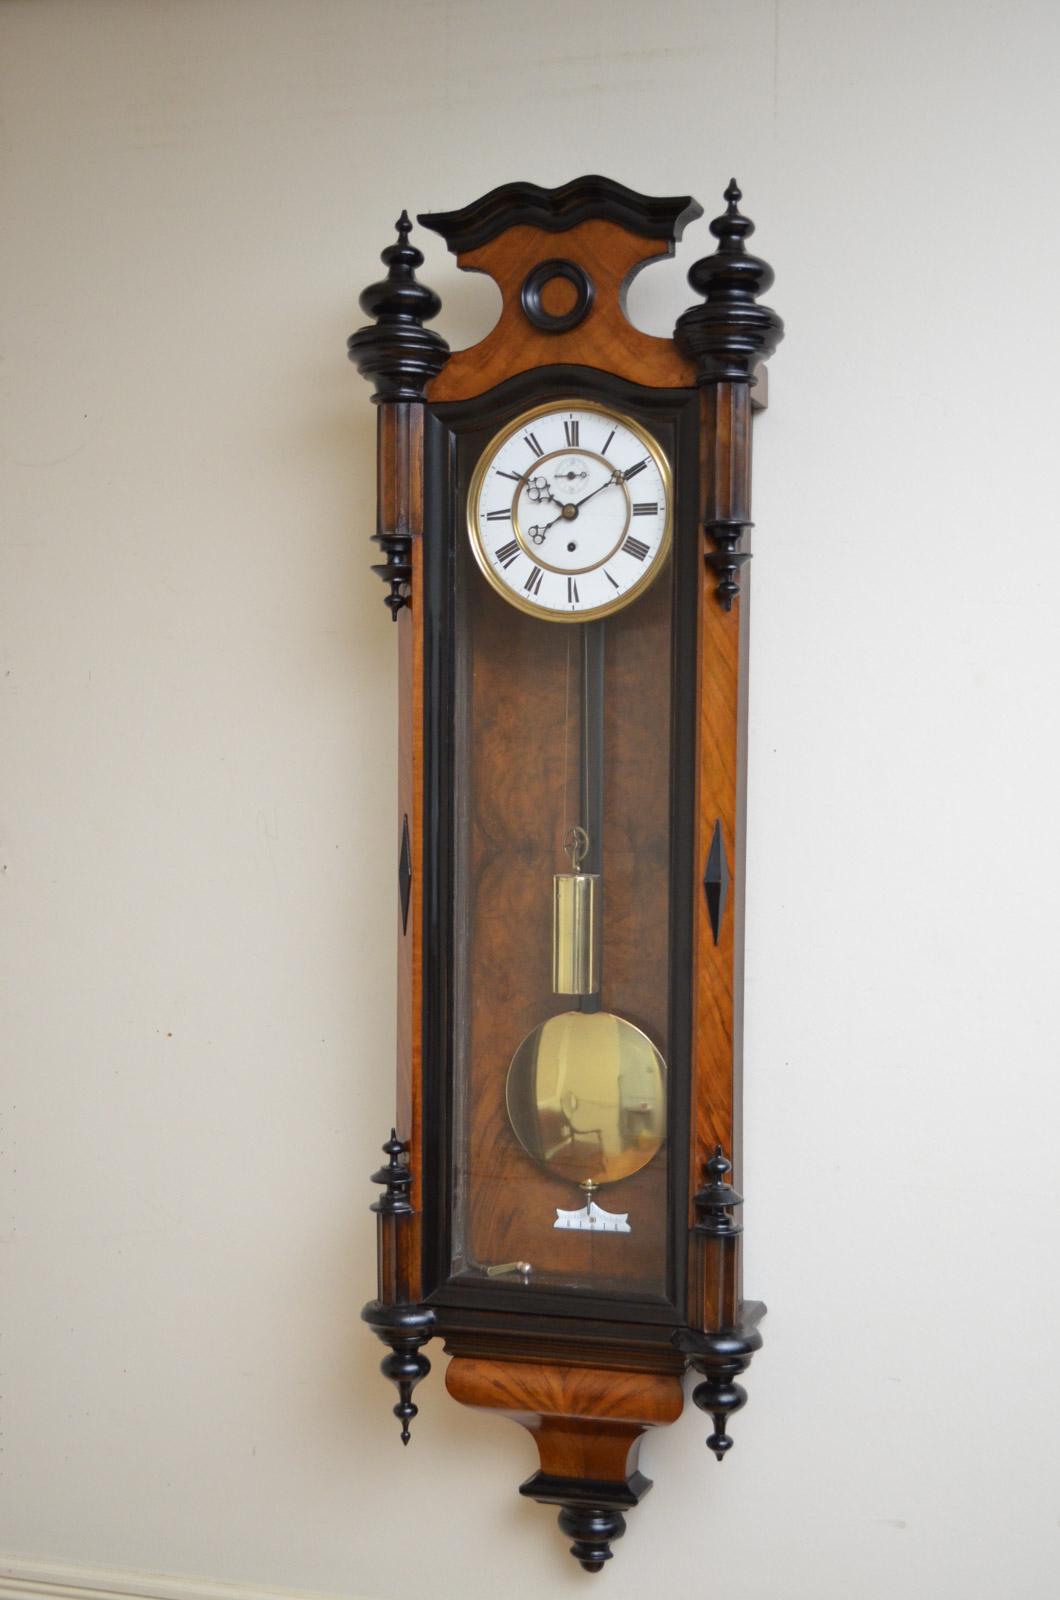 Sn2498 Victorian, figured walnut Vienna clock, having enamelled dial with Roman numerals, original hands and second dial (the seconds hand only takes 45 seconds to reach the 60 mark), all in walnut case with ebonized finials and canted corners with